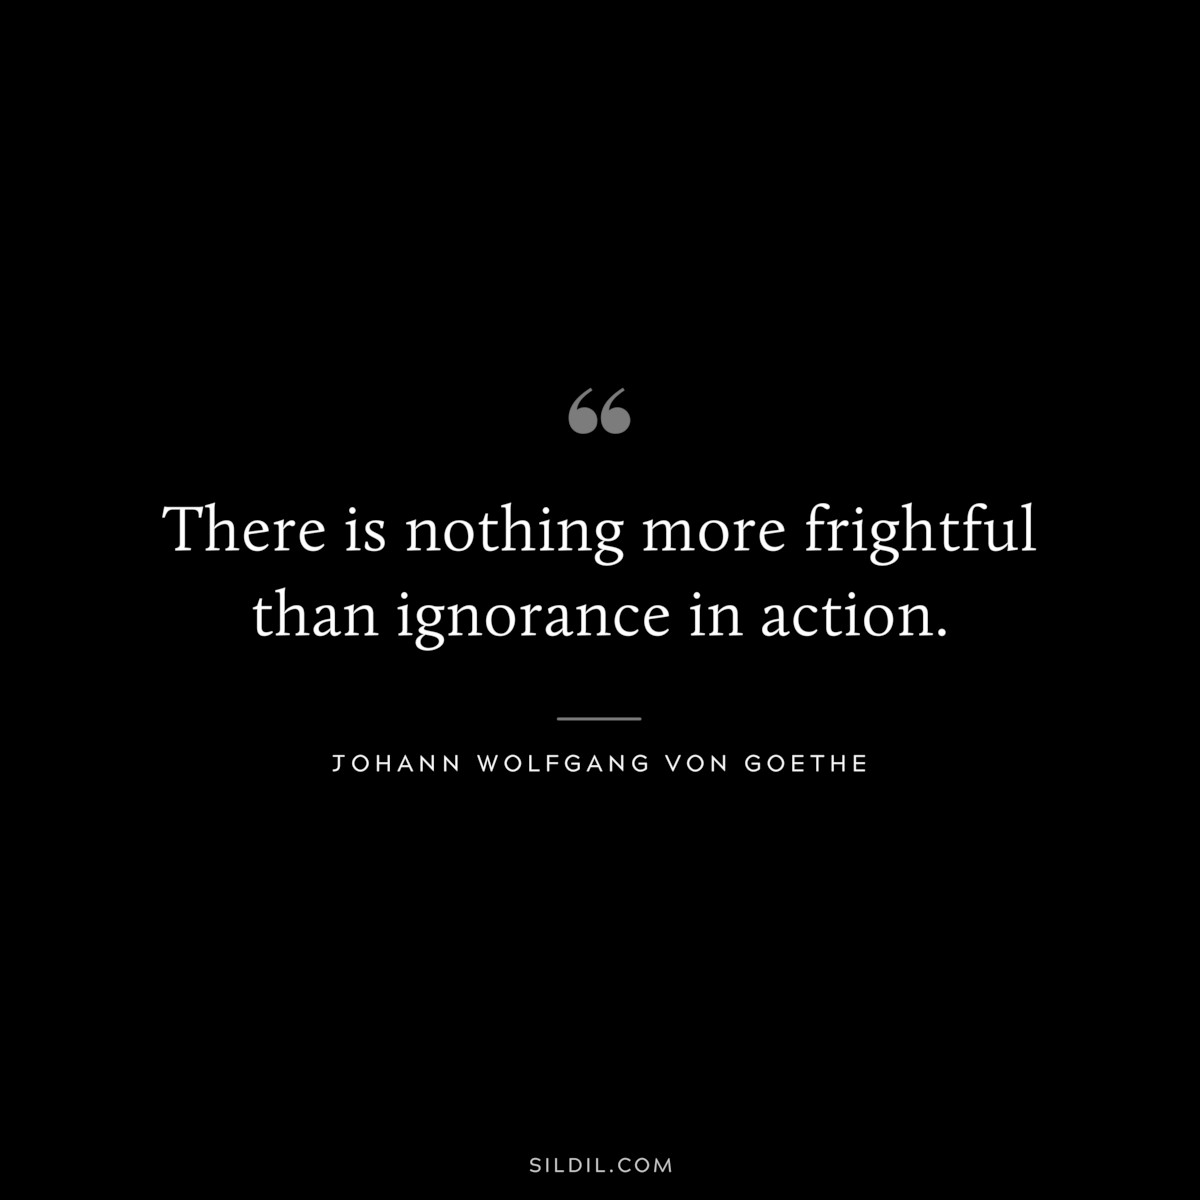 There is nothing more frightful than ignorance in action.― Johann Wolfgang von Goethe